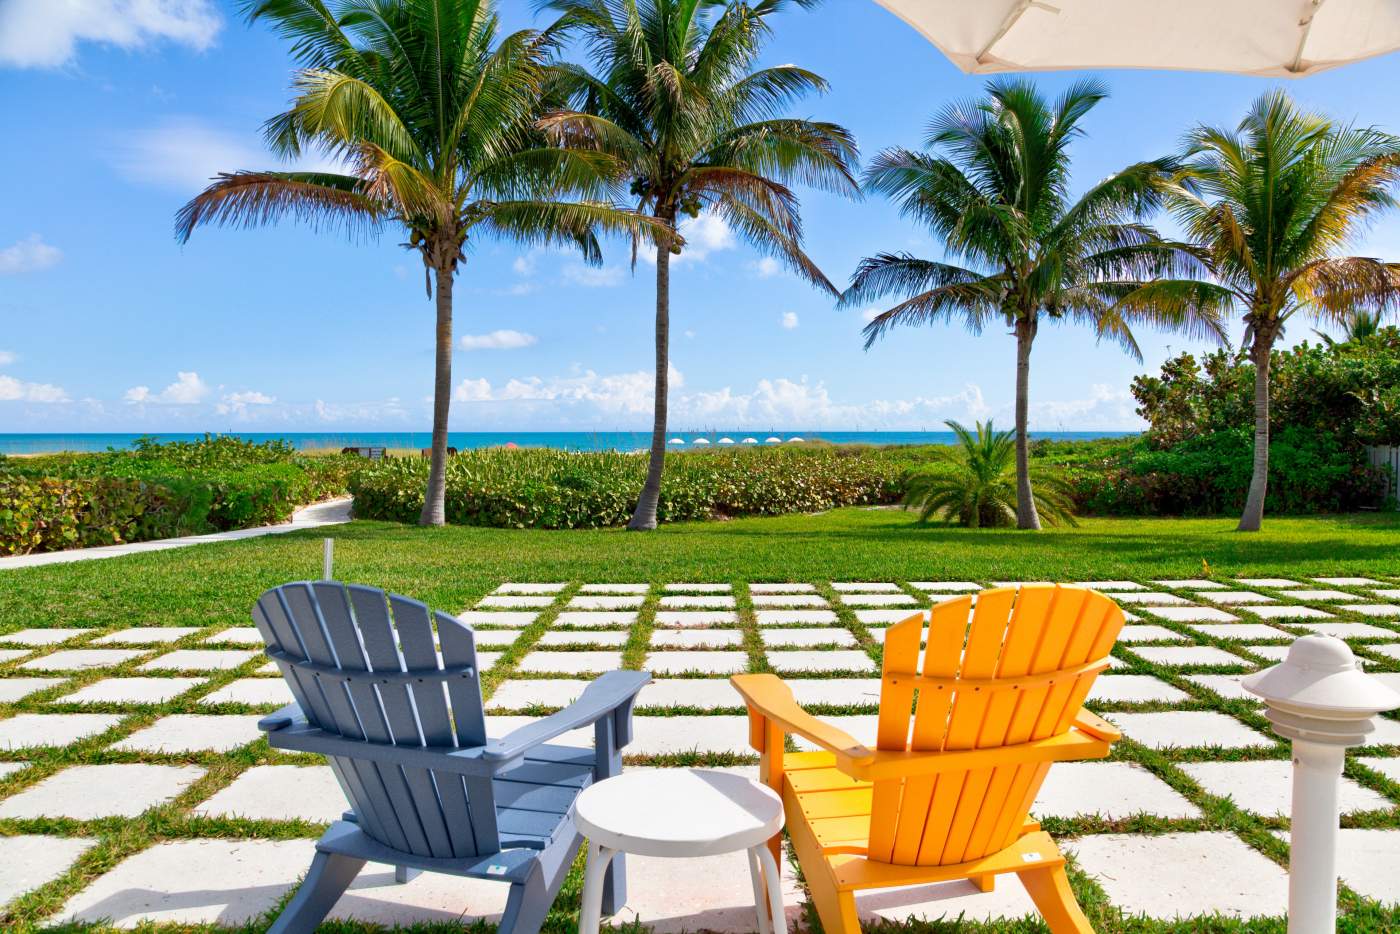 Blue and orange chairs outside with beach in the background